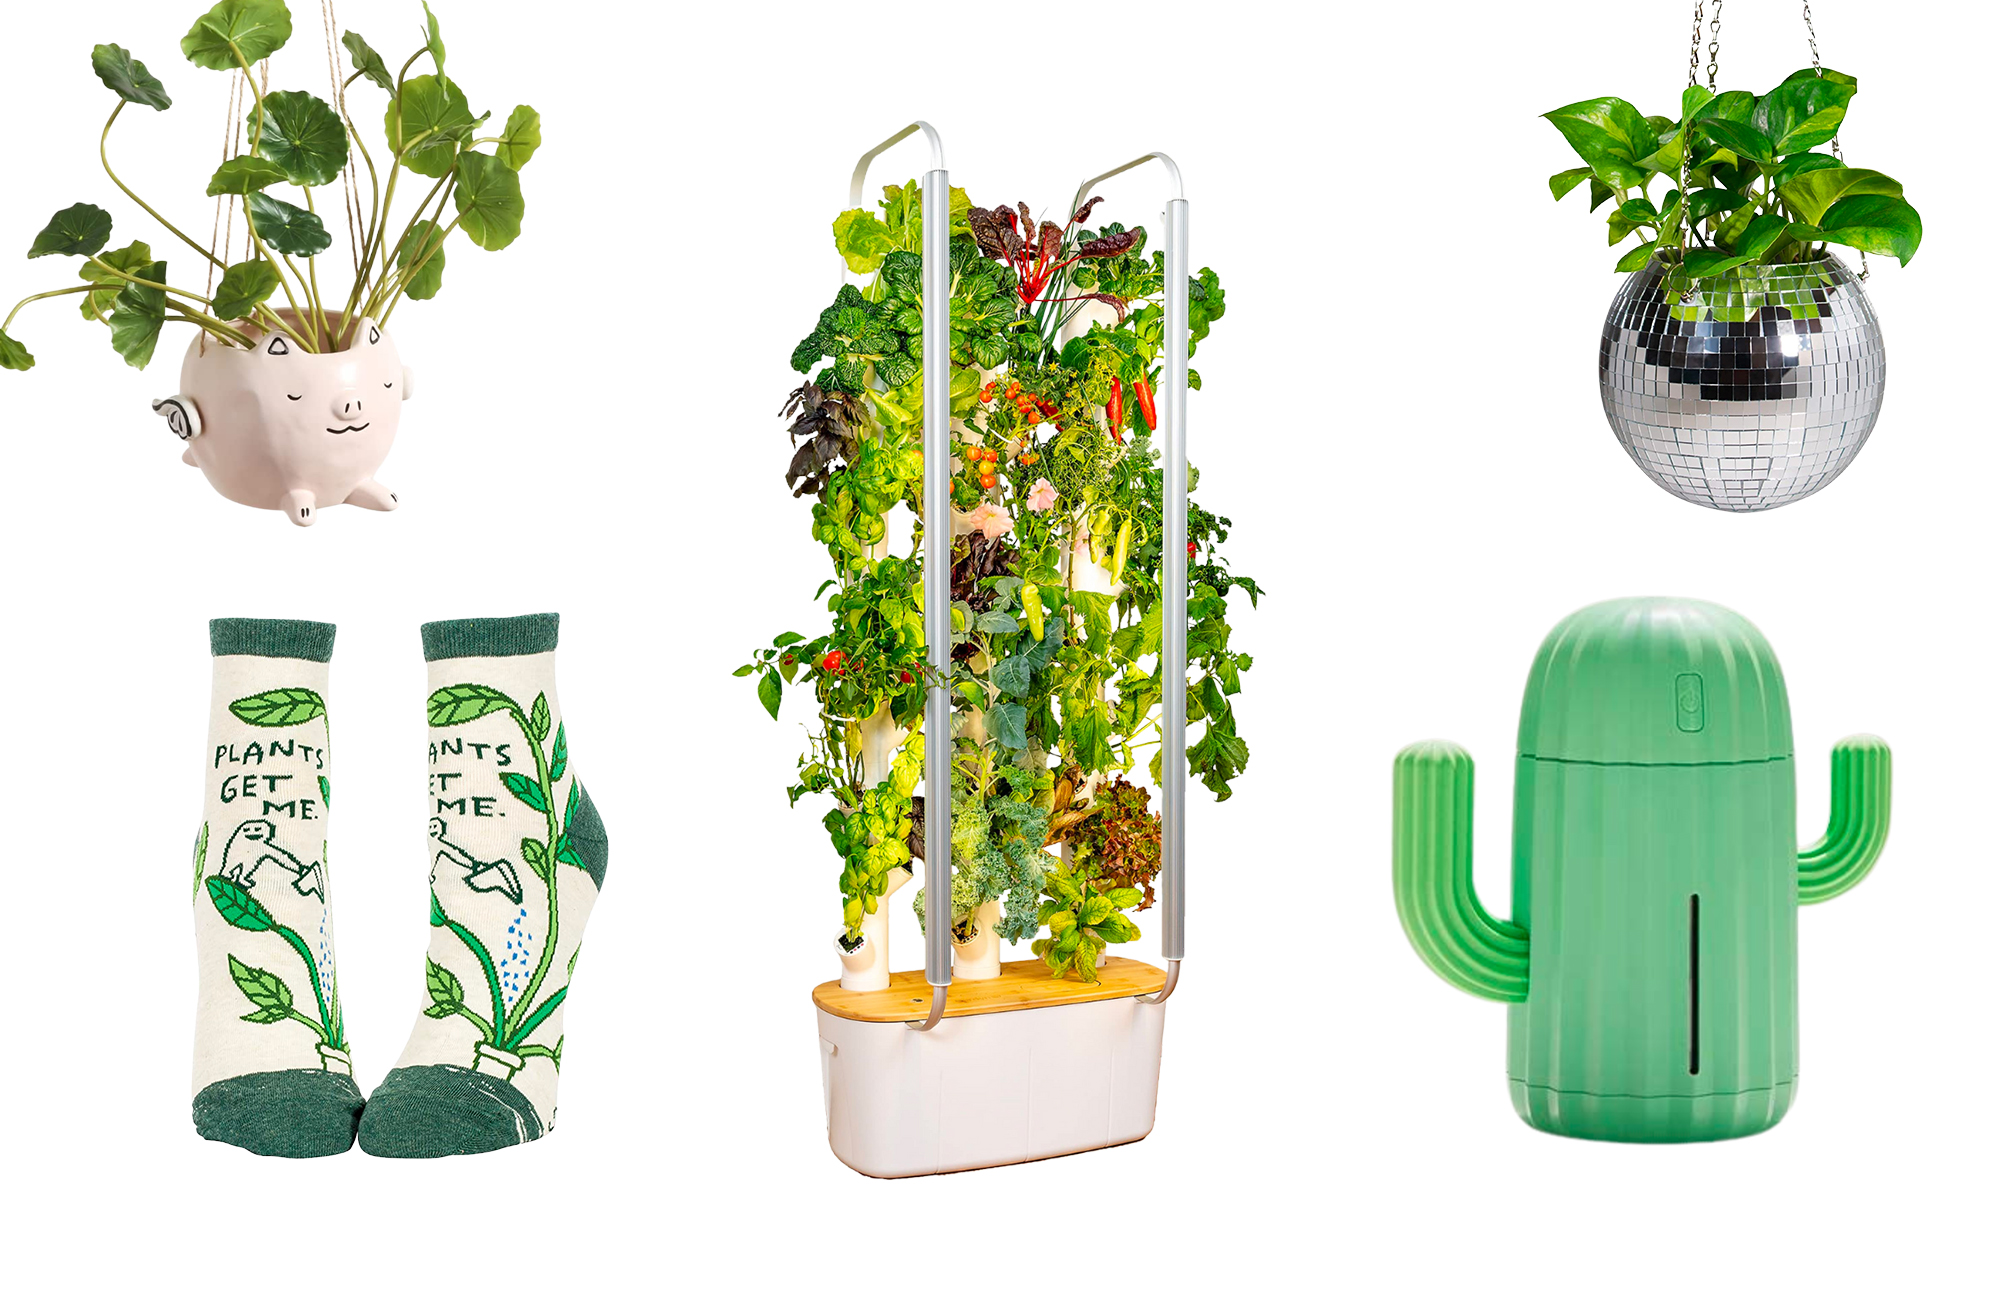 plant gifts, including socks, a hanging flying pig planter, a hanging disco ball planter, a mini cactus humidifier, and a large hydroponic grow tower